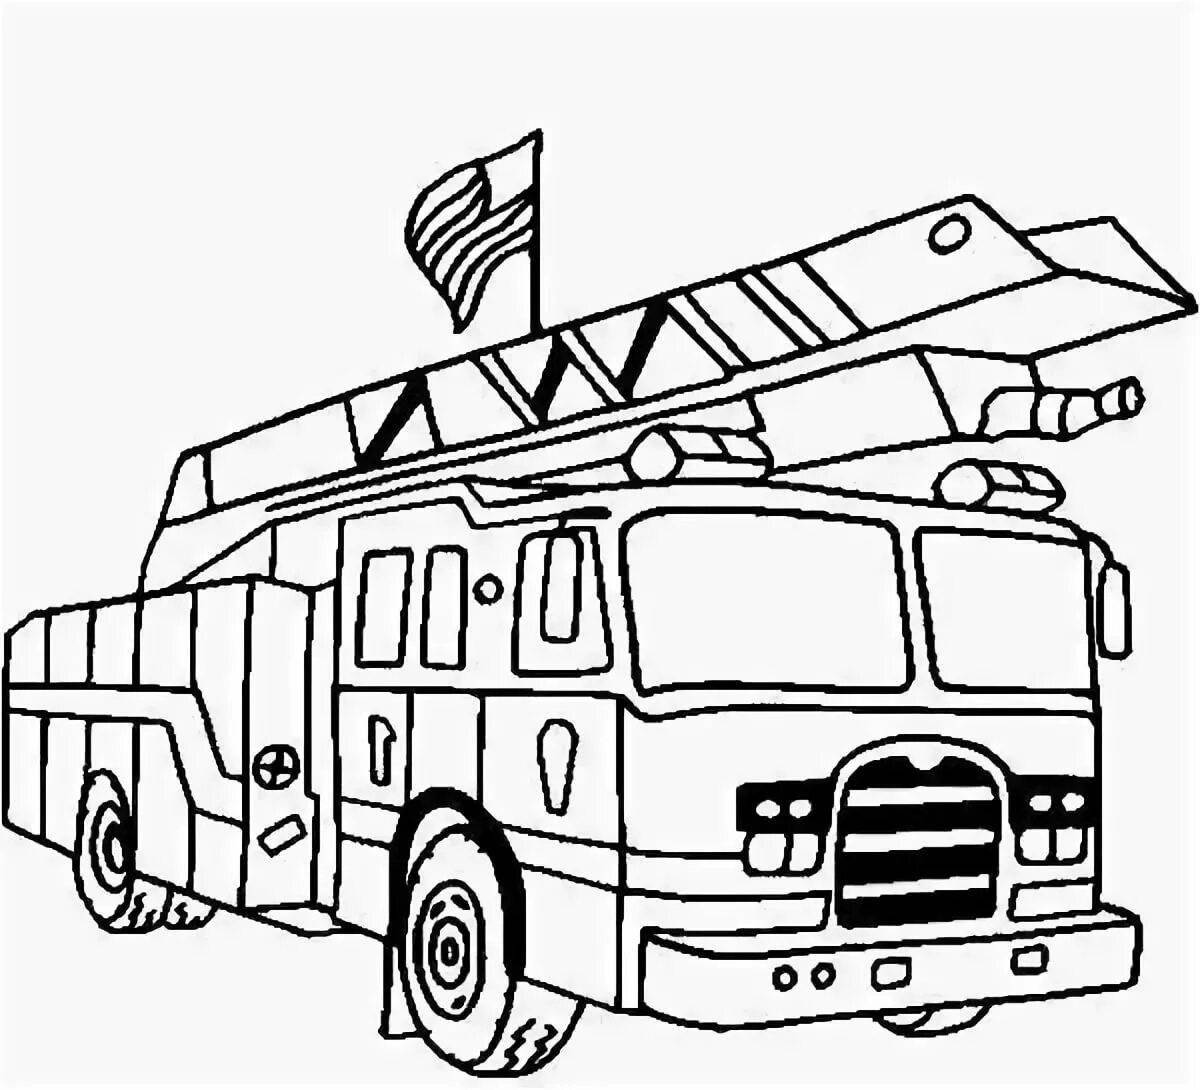 Coloring page happy fire truck